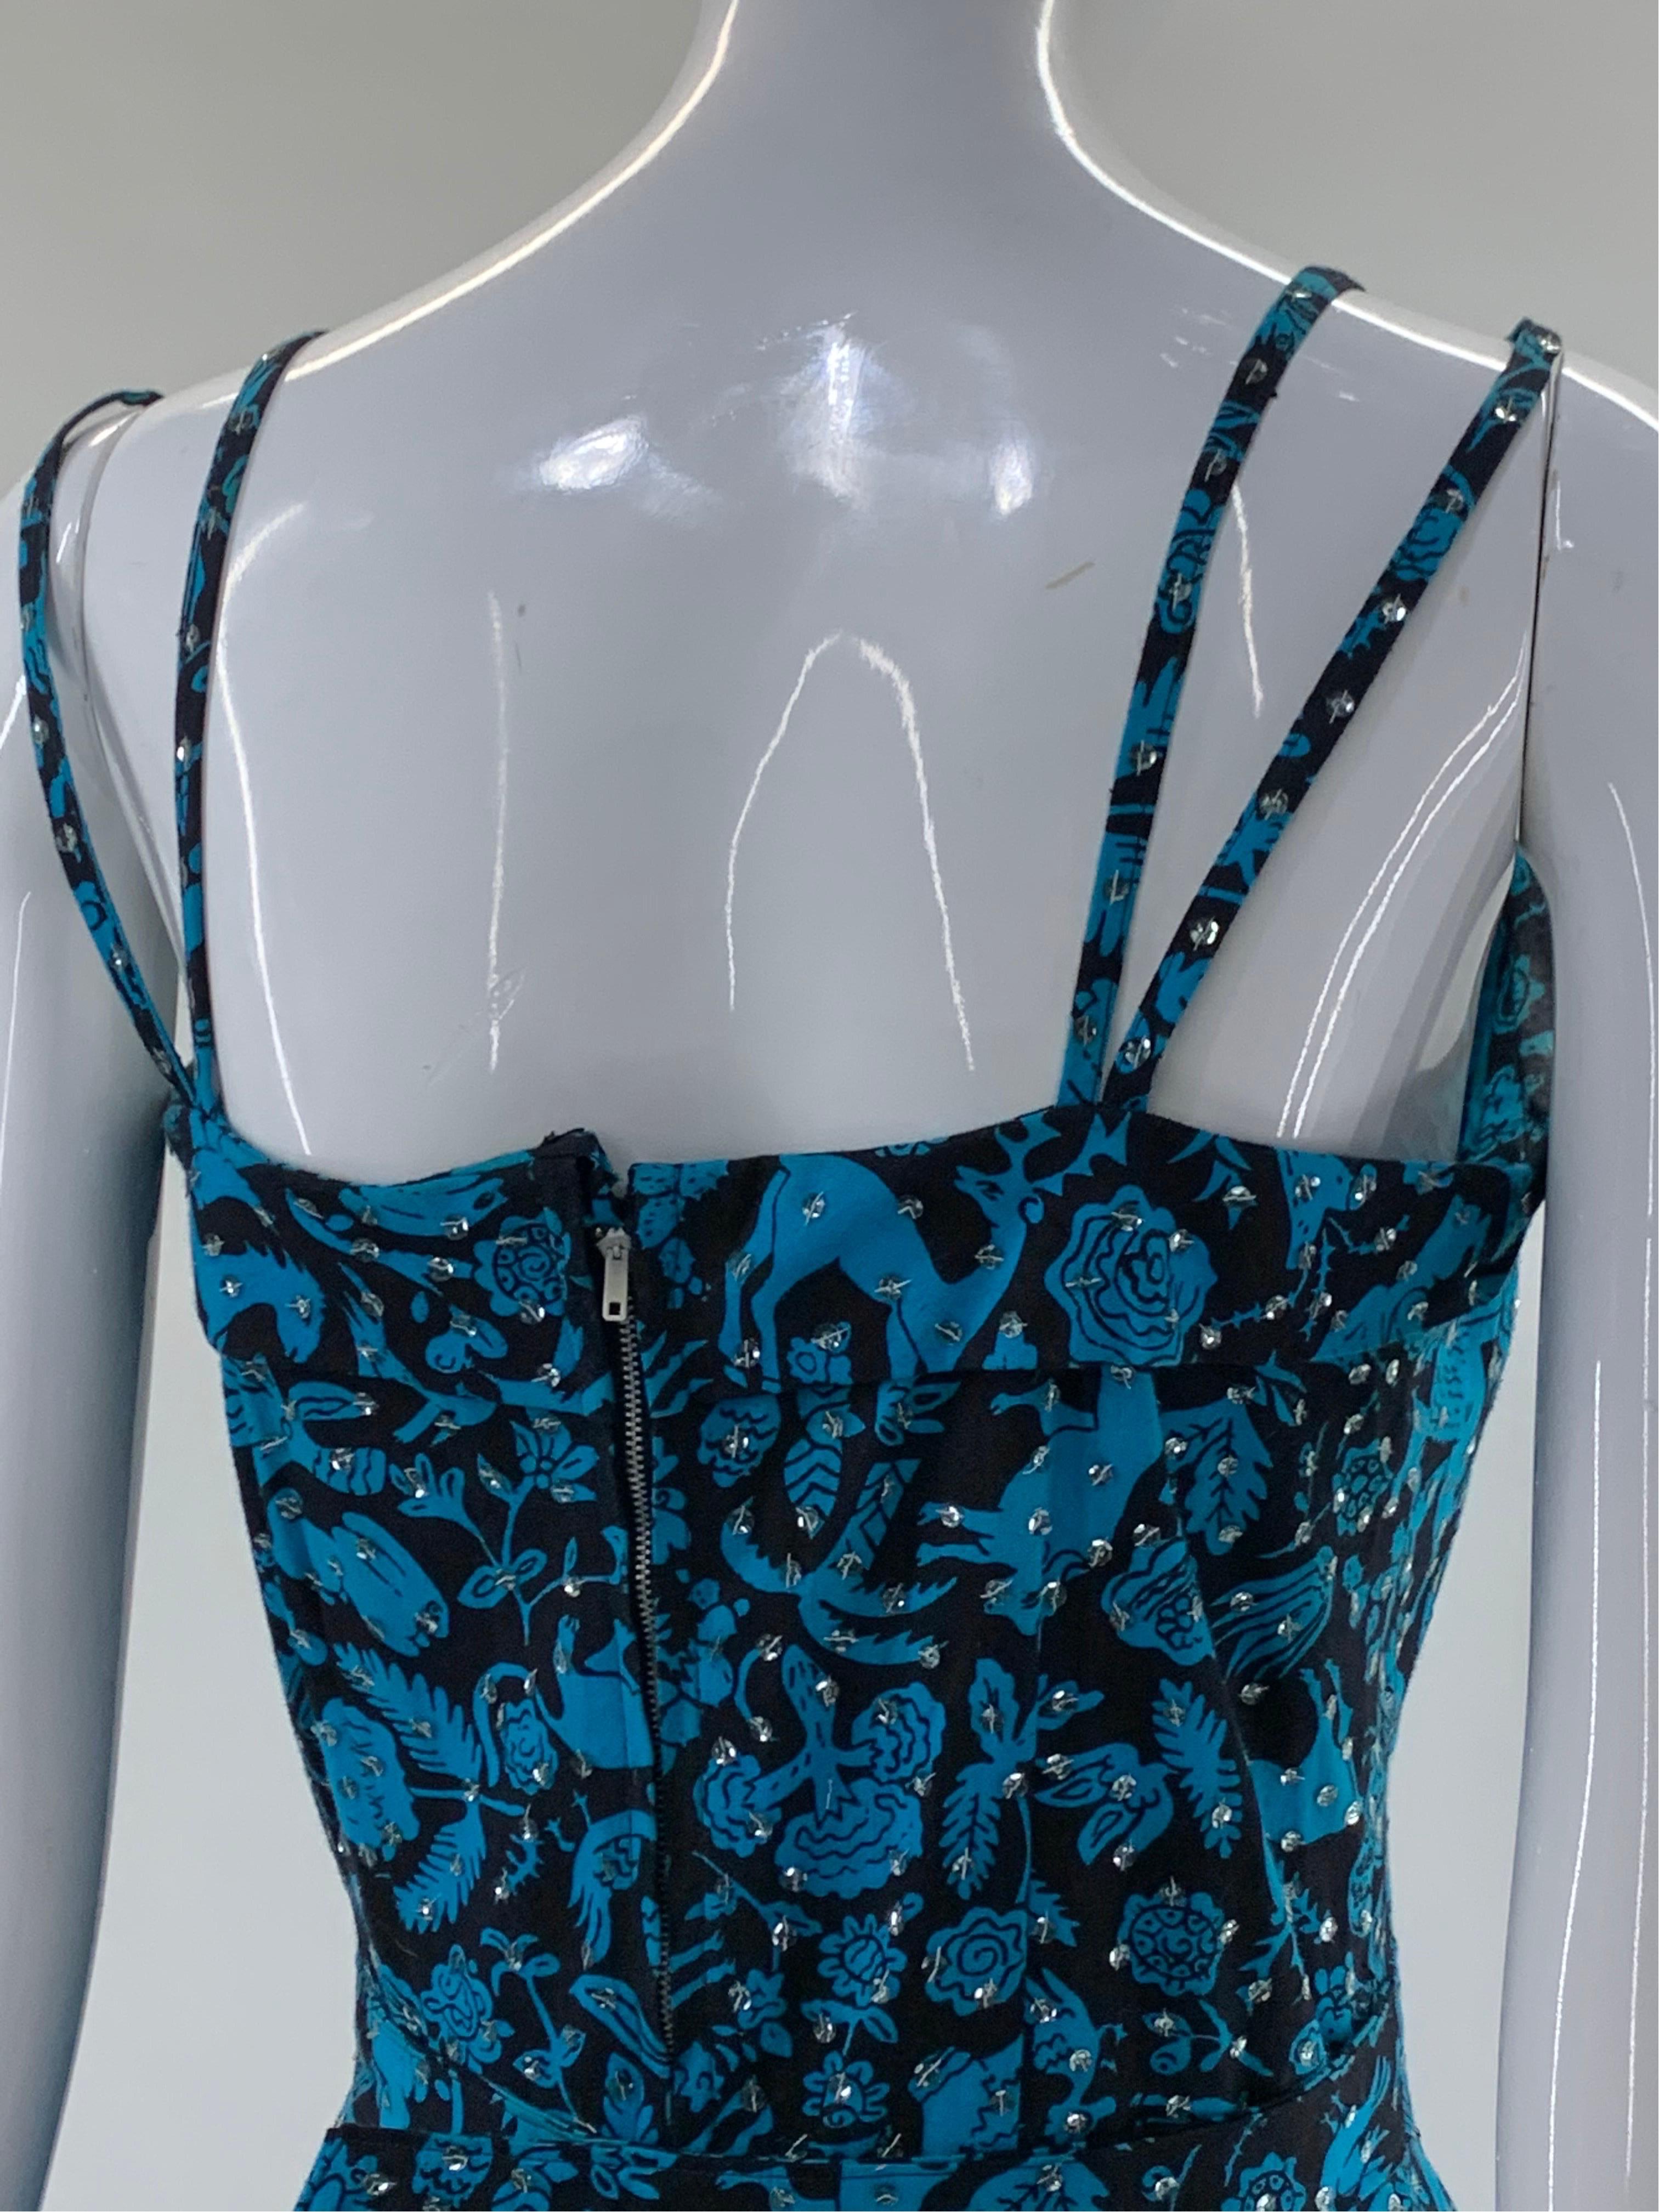 1950s Turquoise & Black Folkloric Print Cotton Summer Dress w/ Scattered Sequins For Sale 5